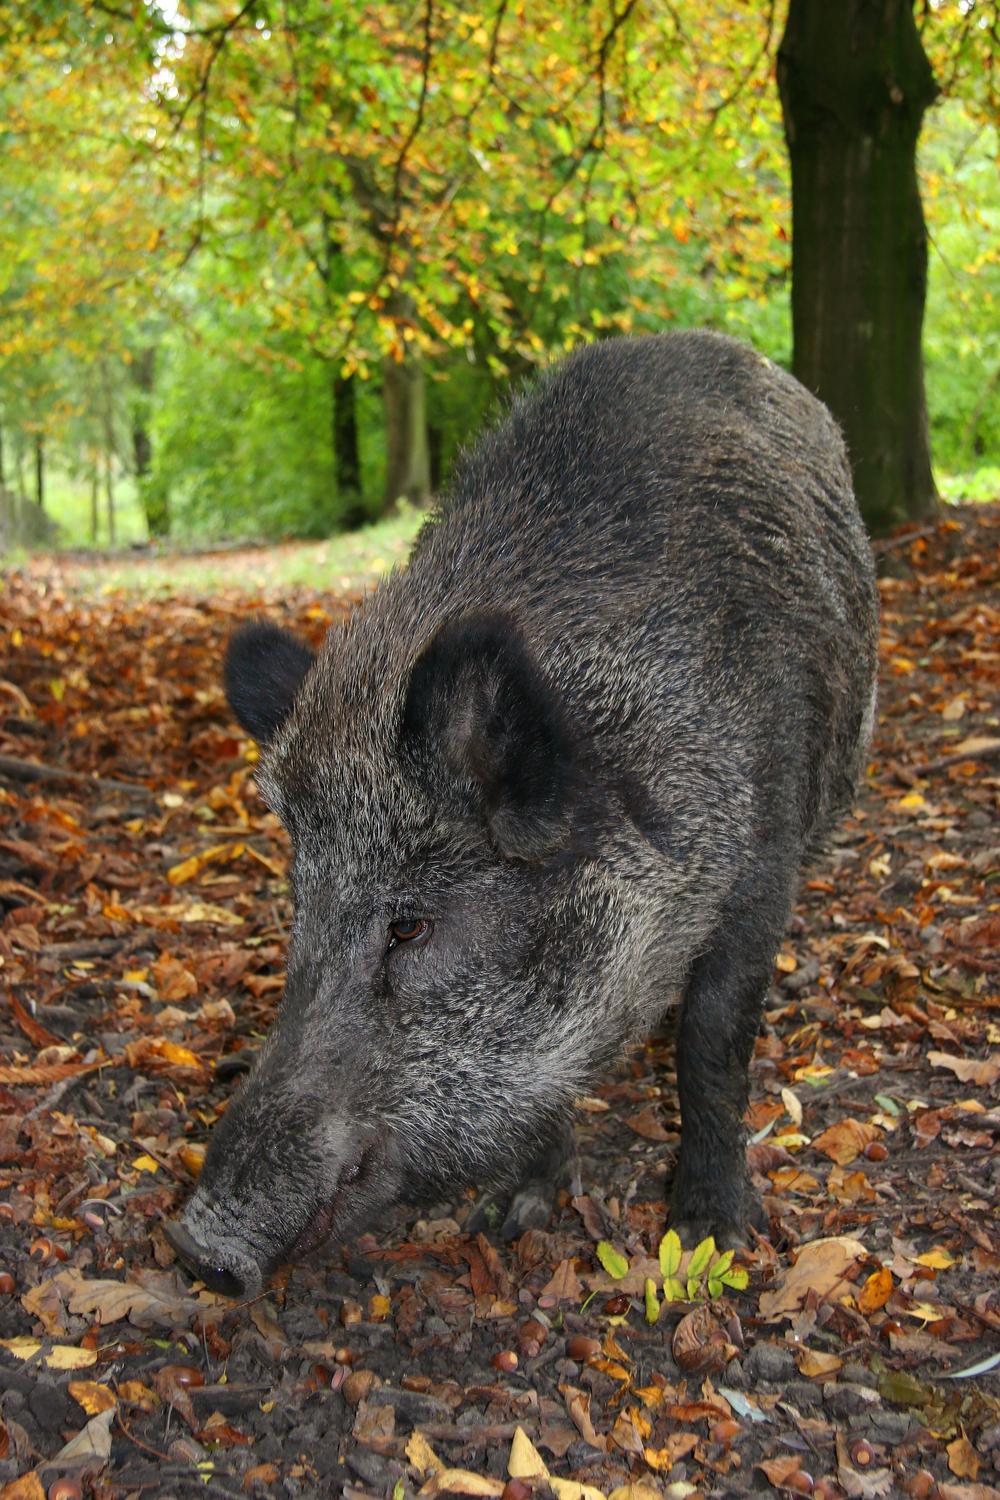 Wild Boars Habits and biology